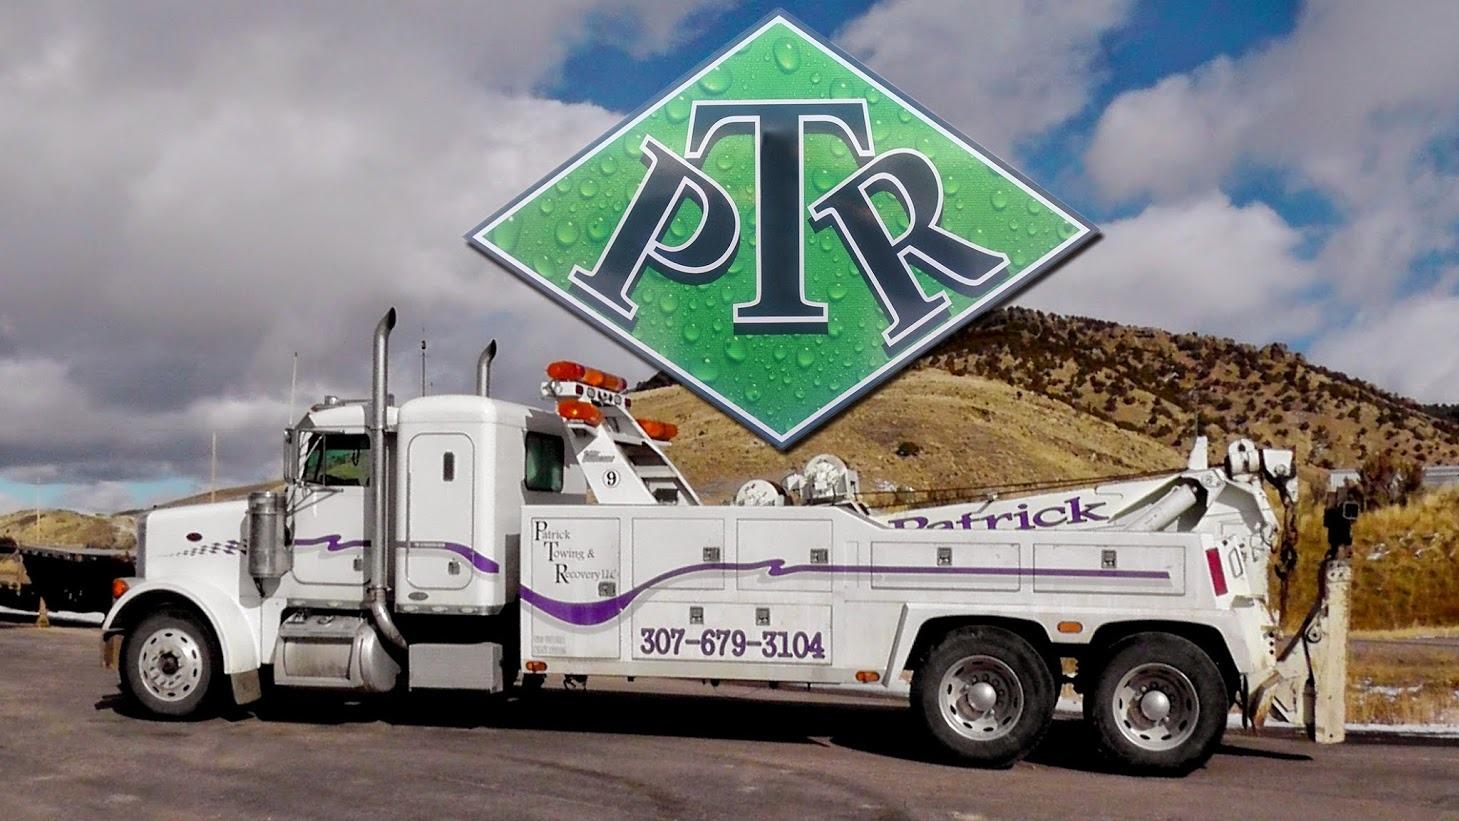 Patrick Towing & Recovery LLC